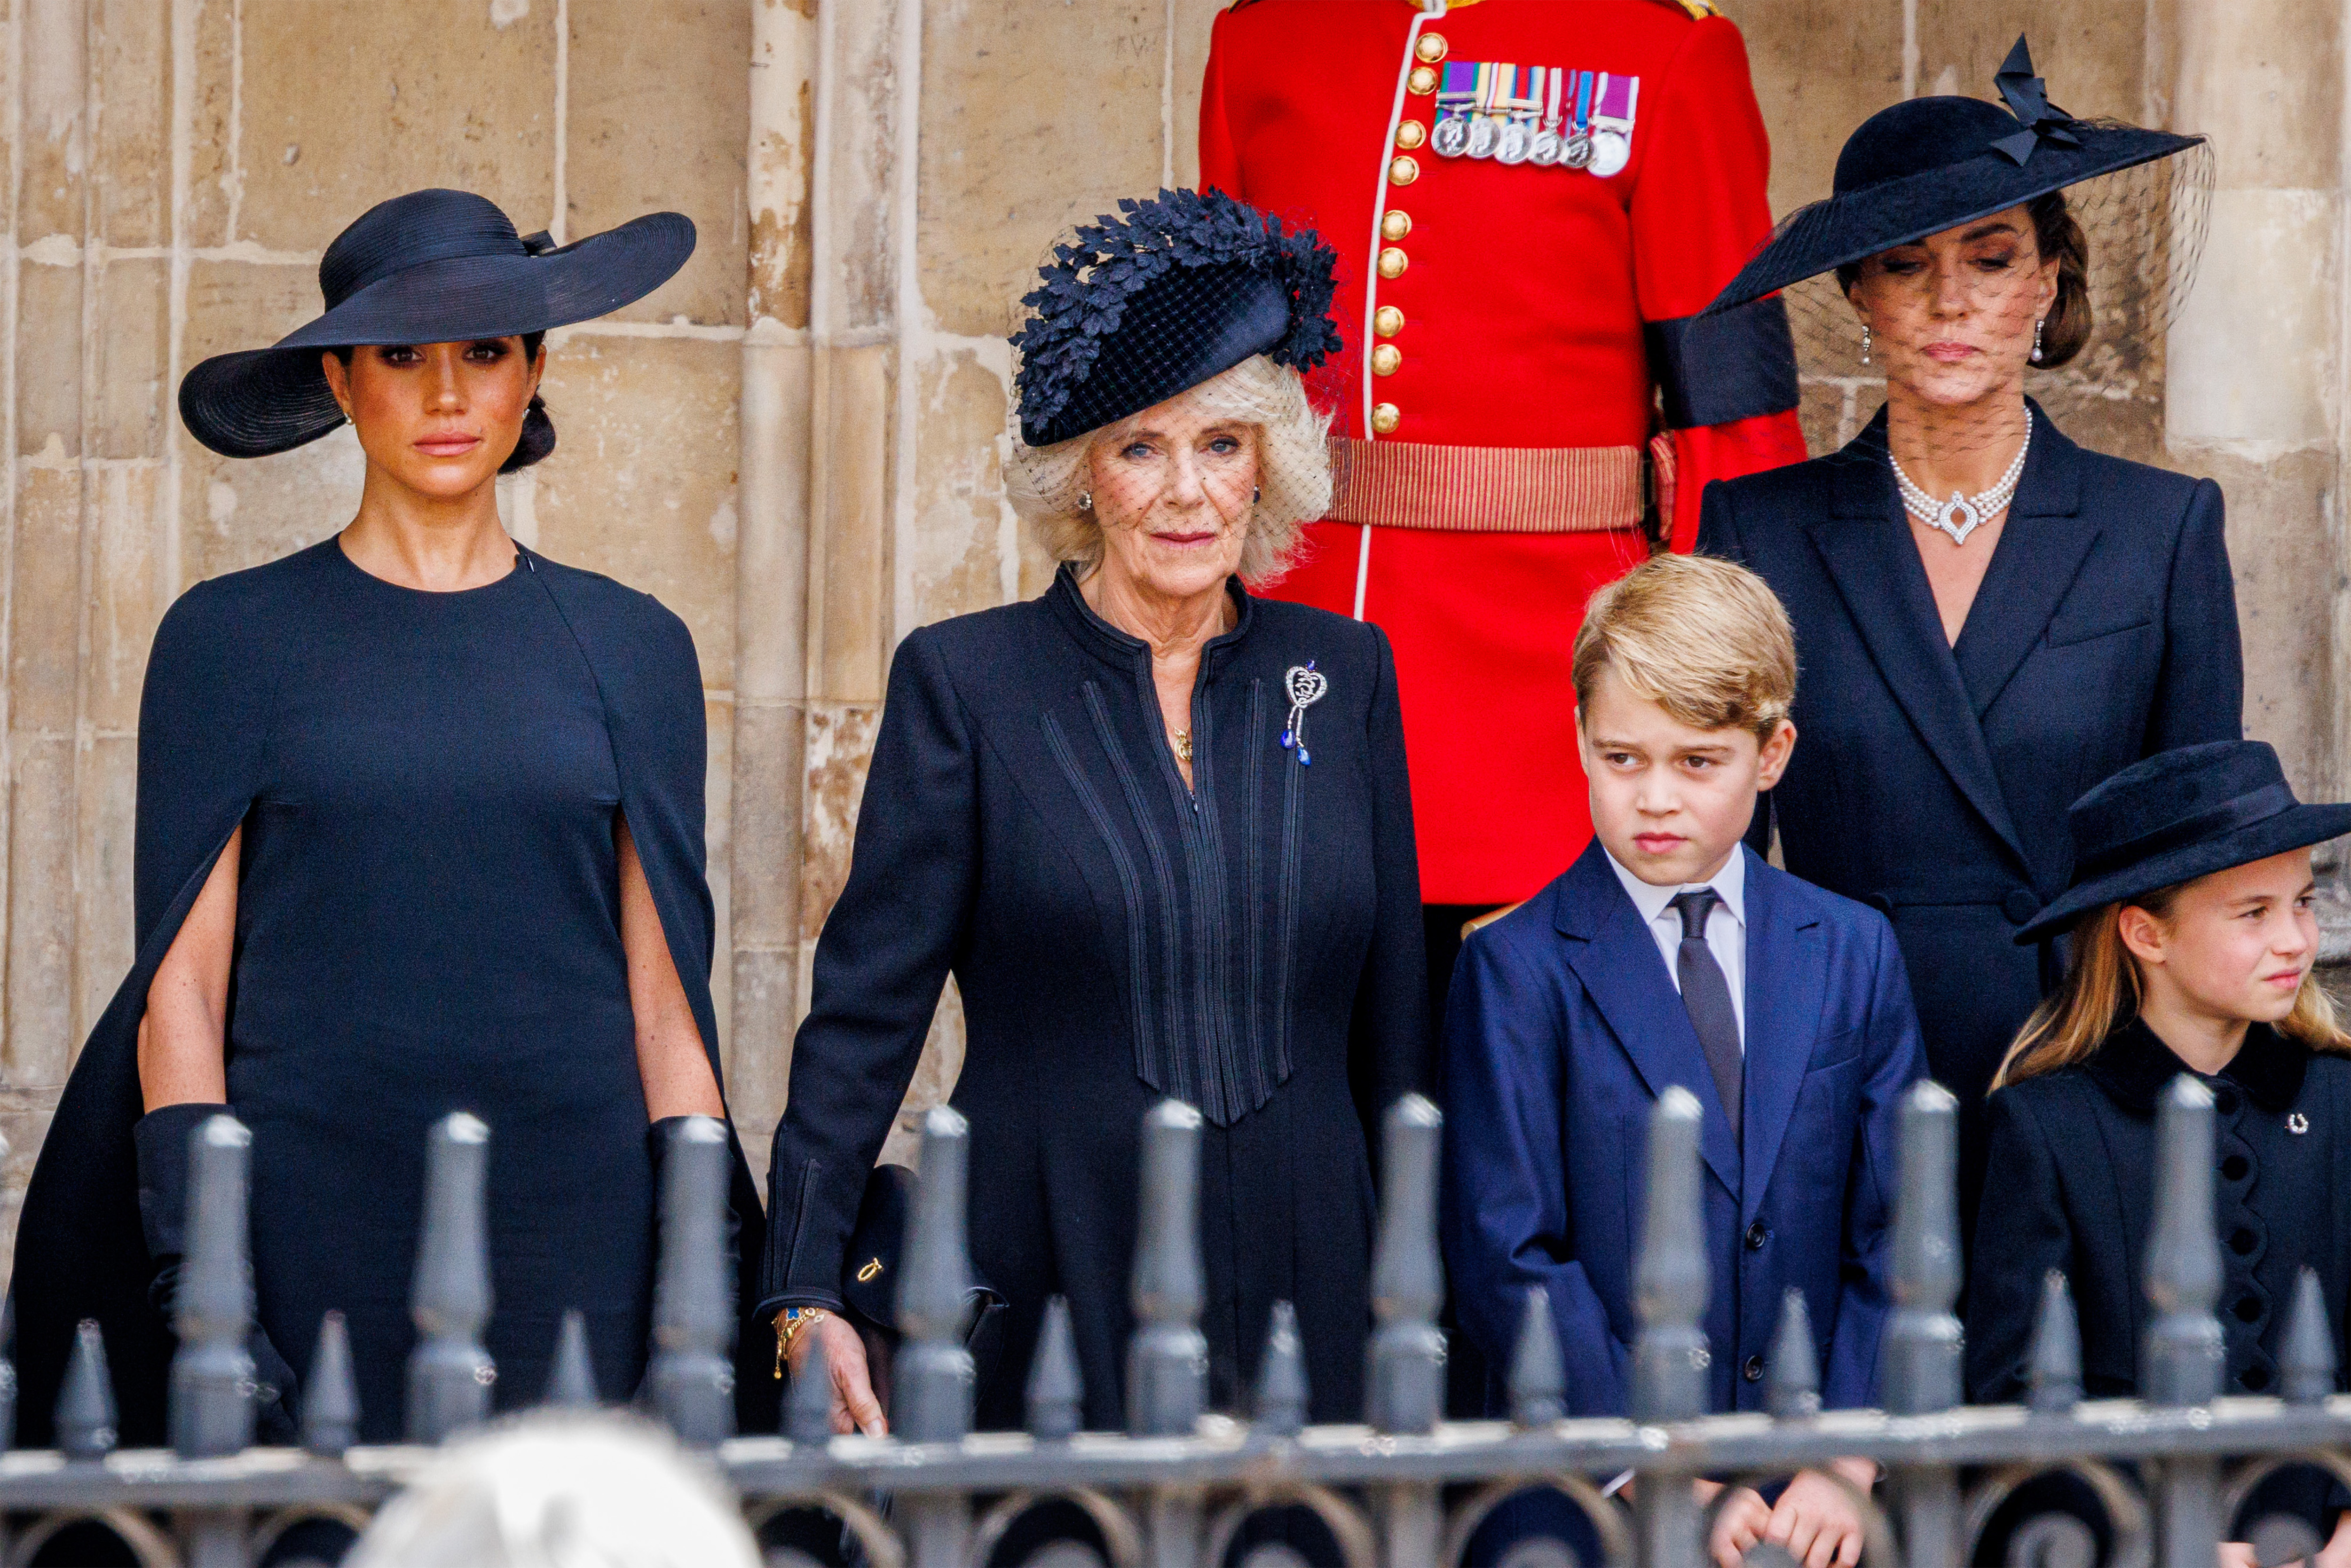 Meghan Markle, Queen Camilla, Prince George, Princess Charlotte, and Princess Catherine at the State Funeral of Queen Elizabeth II at Westminster Abbey on September 19, 2022 in London, England | Source: Getty Images